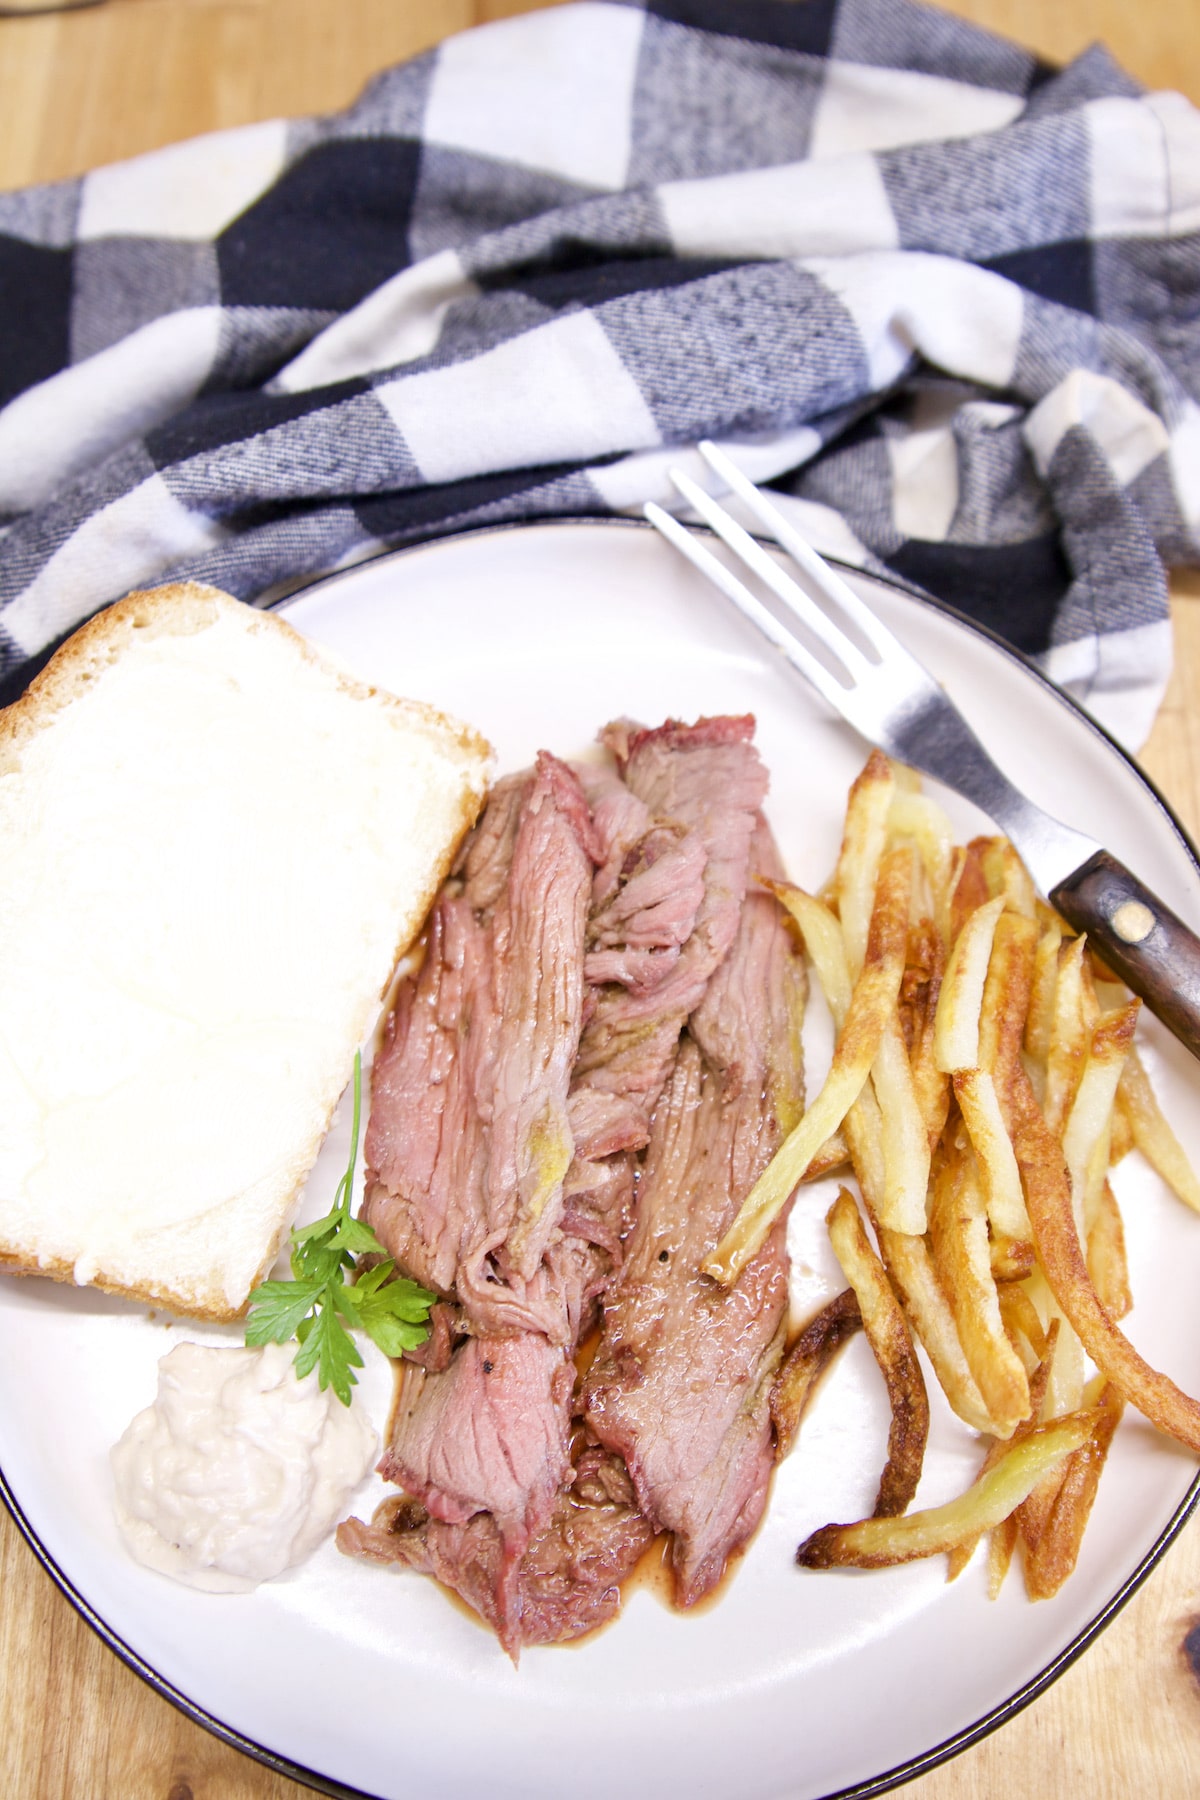 Plate with slice of white bread, sliced roast beef, french fries.